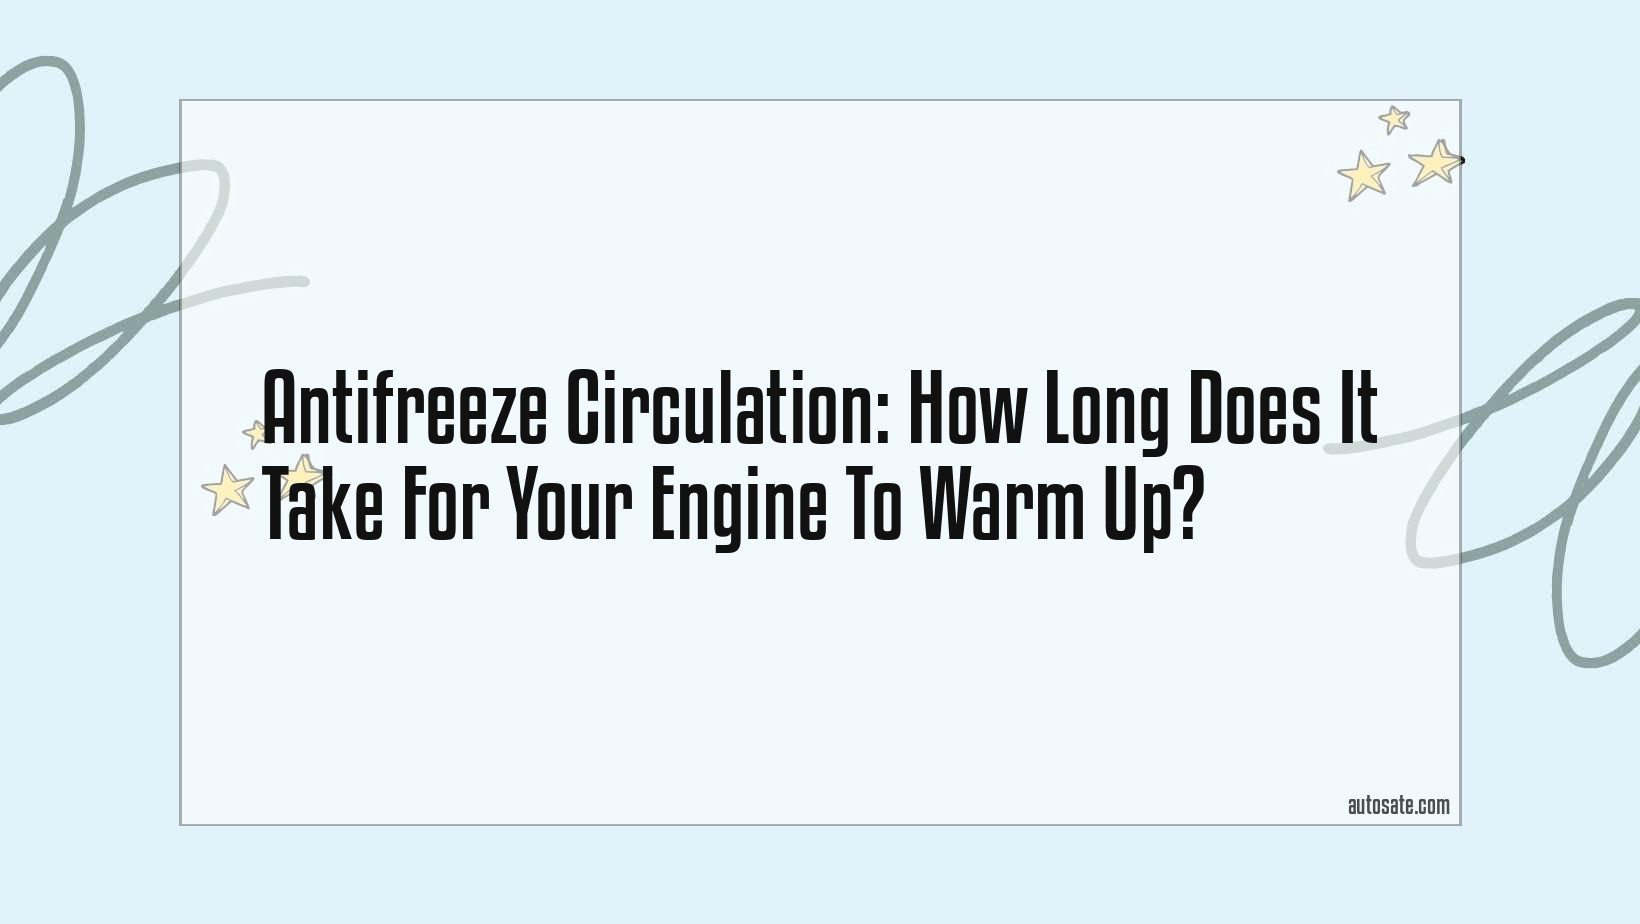 Antifreeze Circulation: How Long Does It Take For Your Engine To Warm Up?